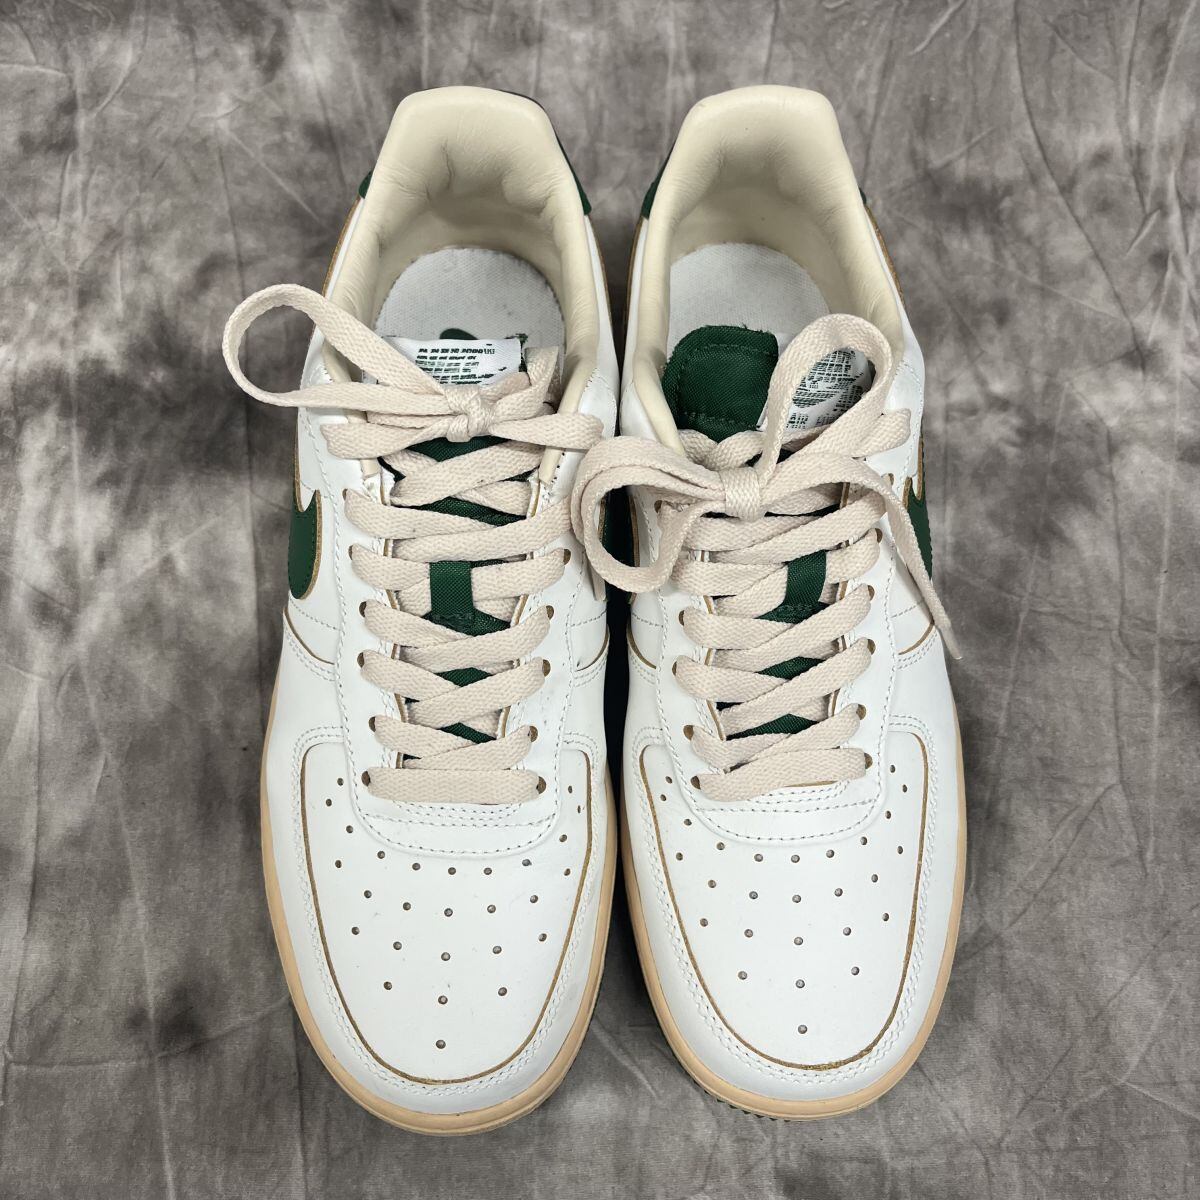 AIR FORCE 1 '07 LV8 Green and Muslin